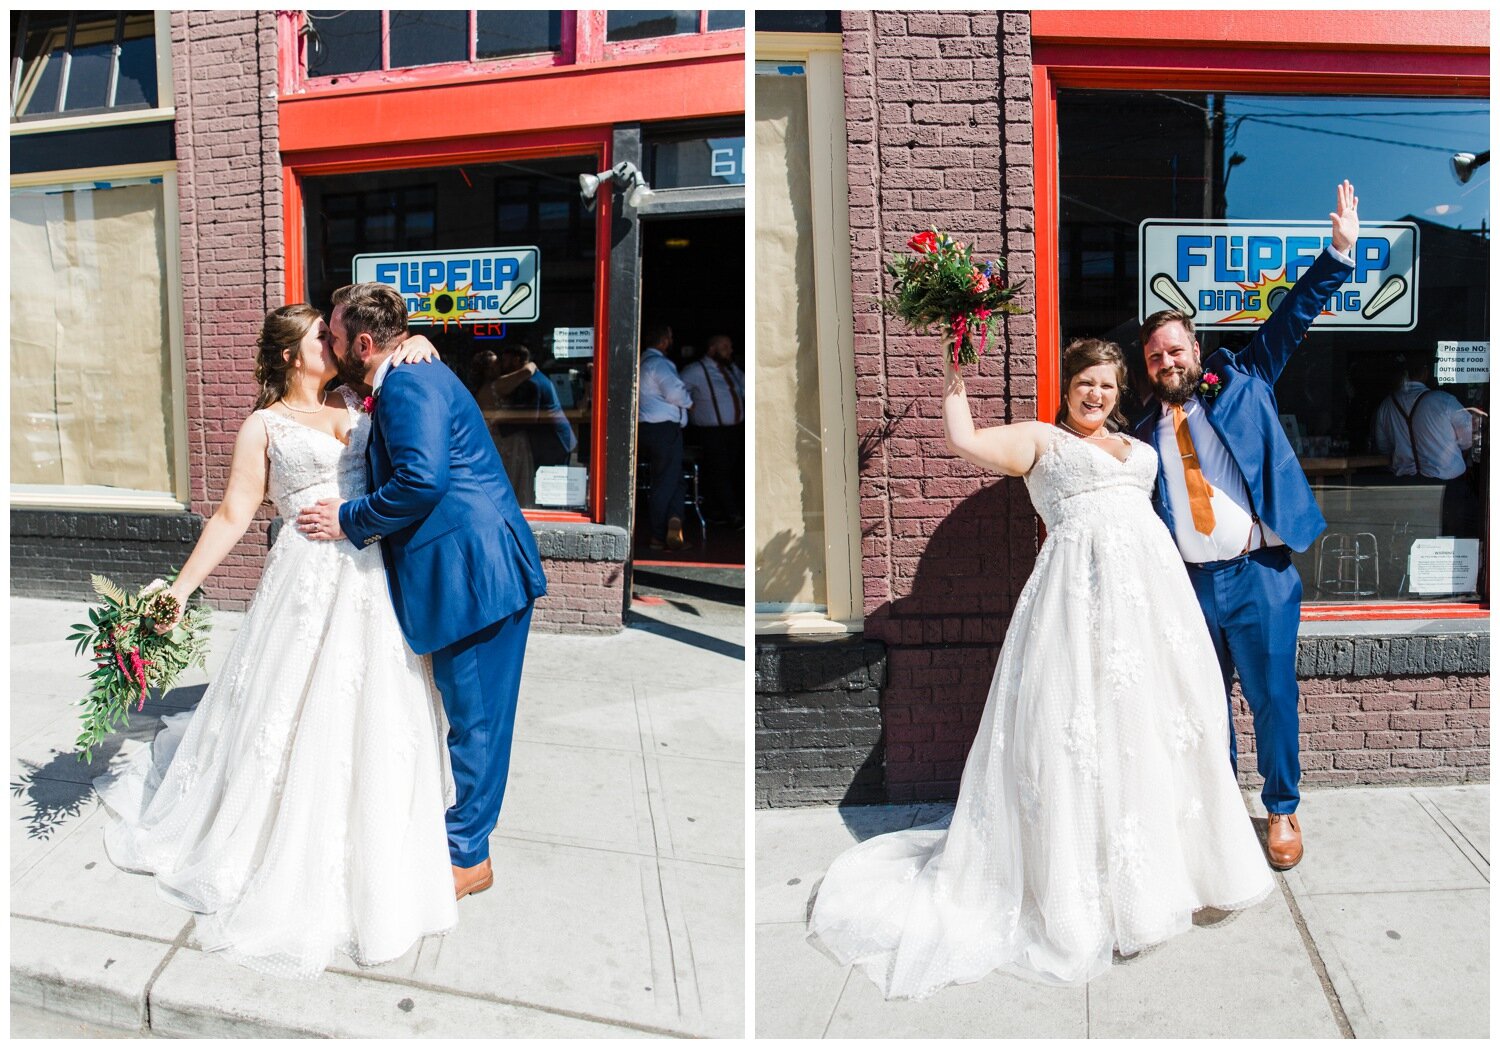 Wedding Photography at Flip Flip Ding Ding in Seattle